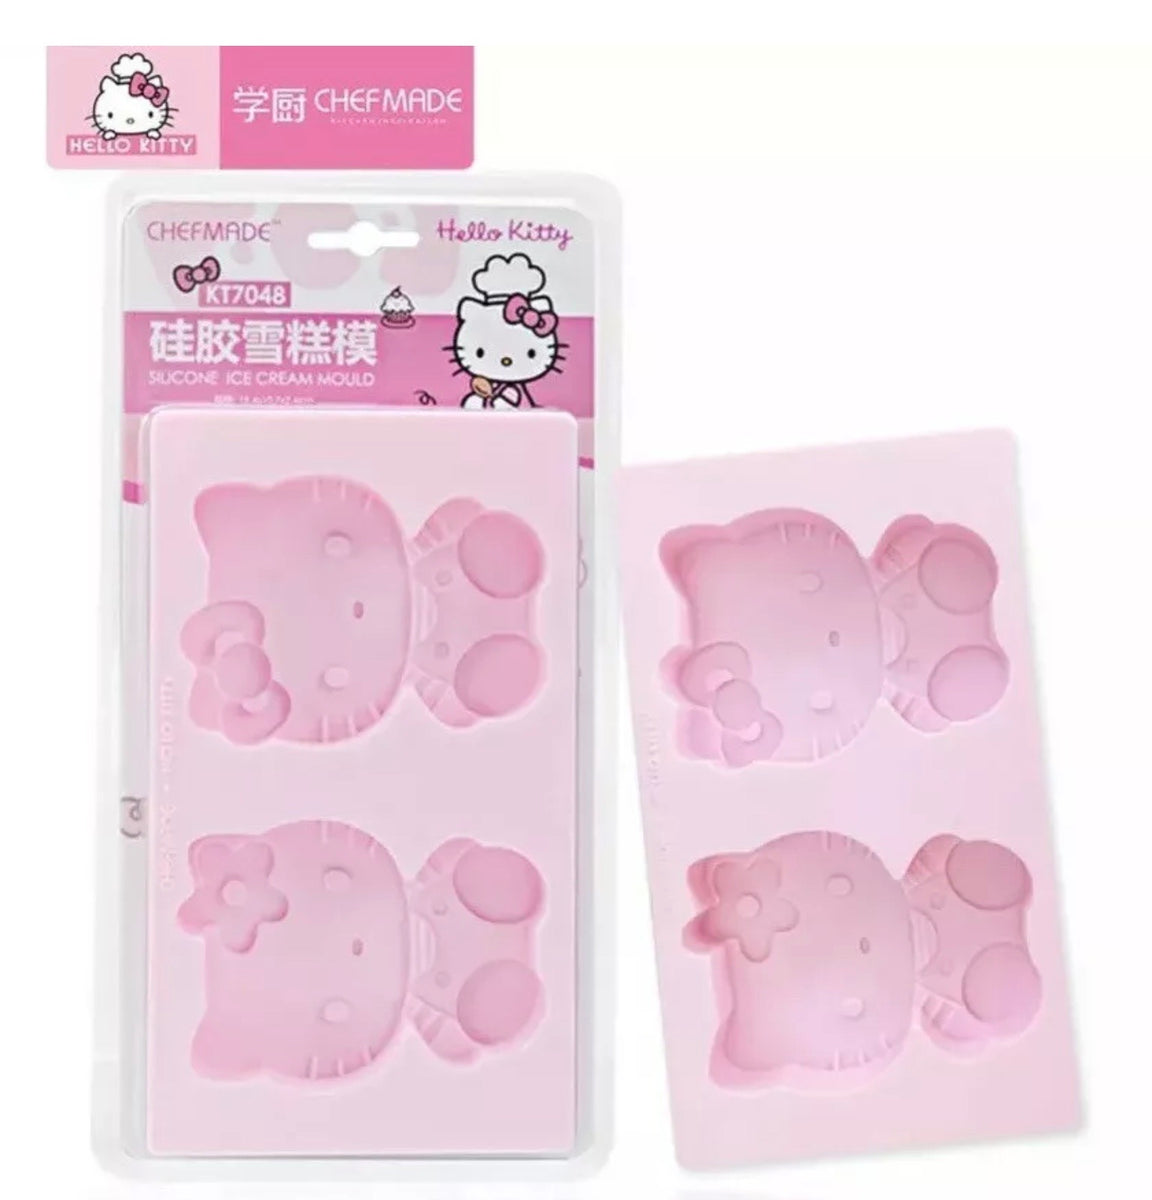 Shop Silicone Ice Cream Moulds